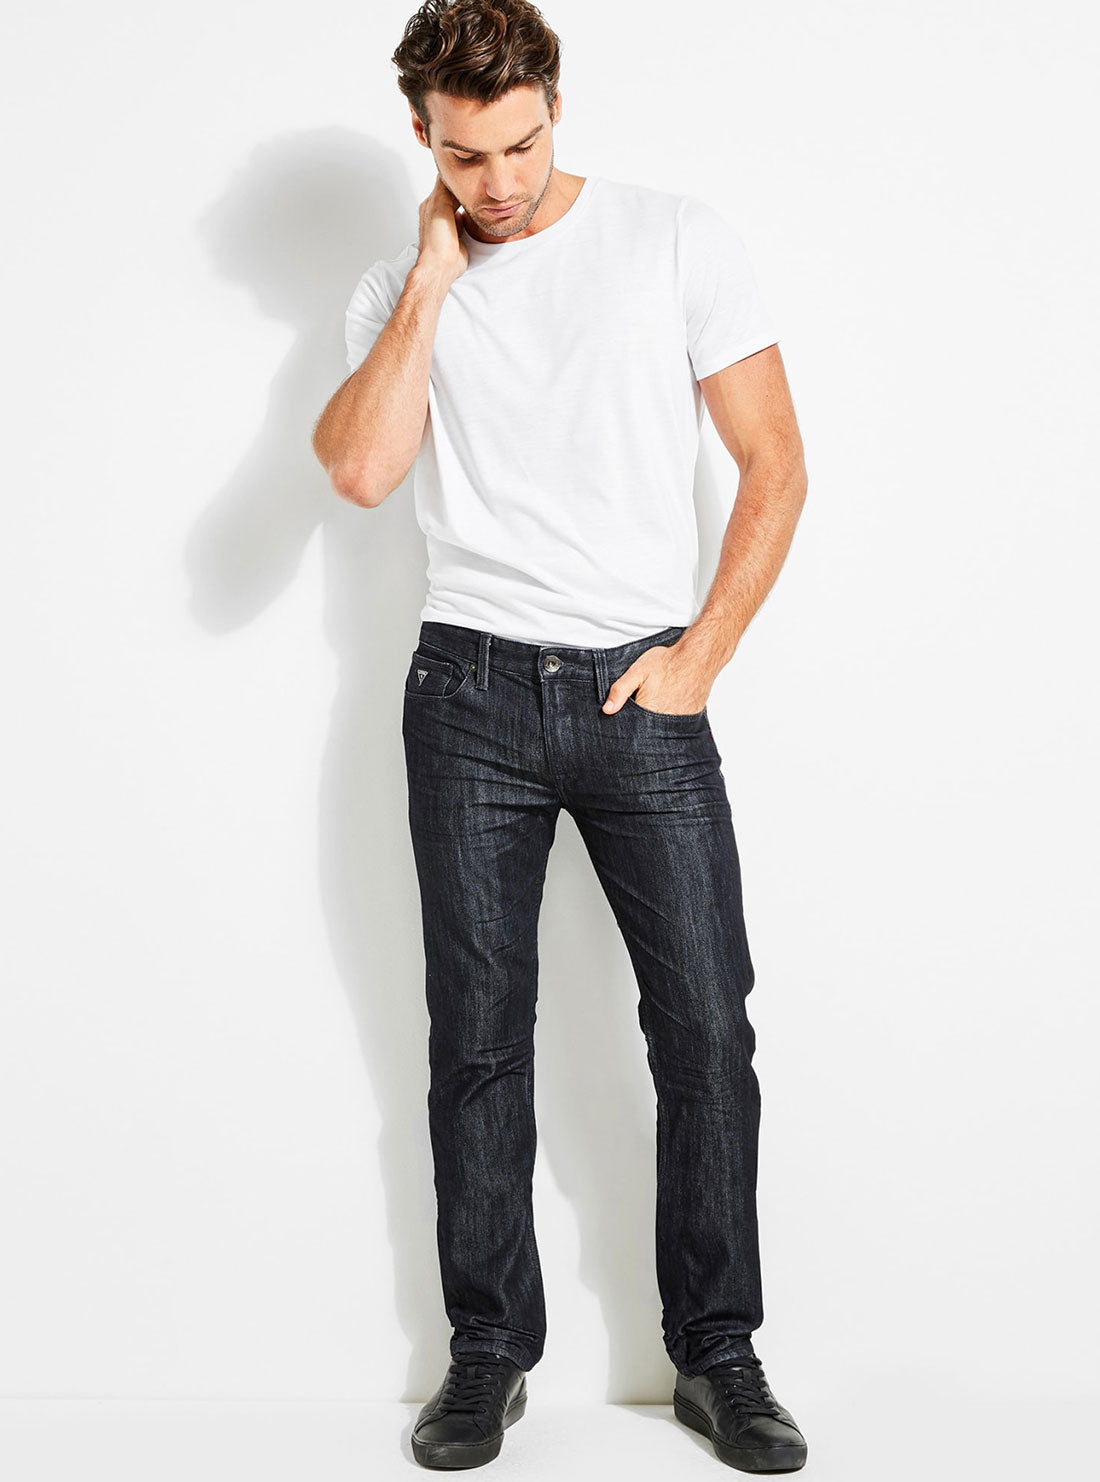 GUESS Mens Low-Rise Slim Straight Denim Jeans in Smokescreen Wash MB3AS121OD0 Model View